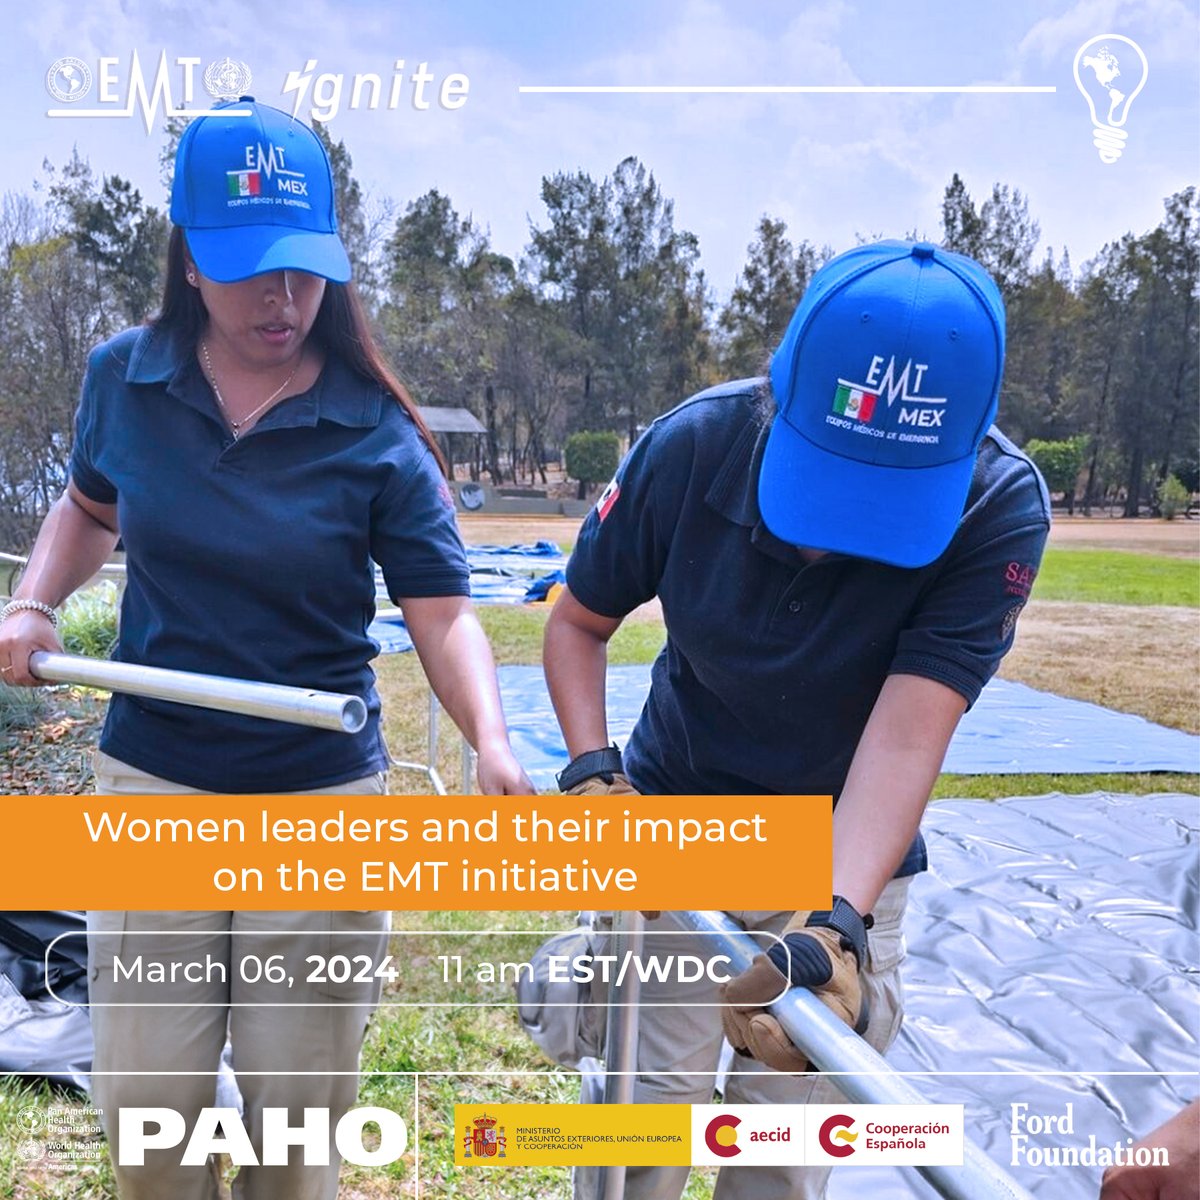 This week on #EMTignite we are amplifying women's voices and their contributions to Emergency Medical Teams (EMTs) in the Americas.

Join us to learn more about women's active roles on #EMTamericas.

paho.org/en/events/wome…